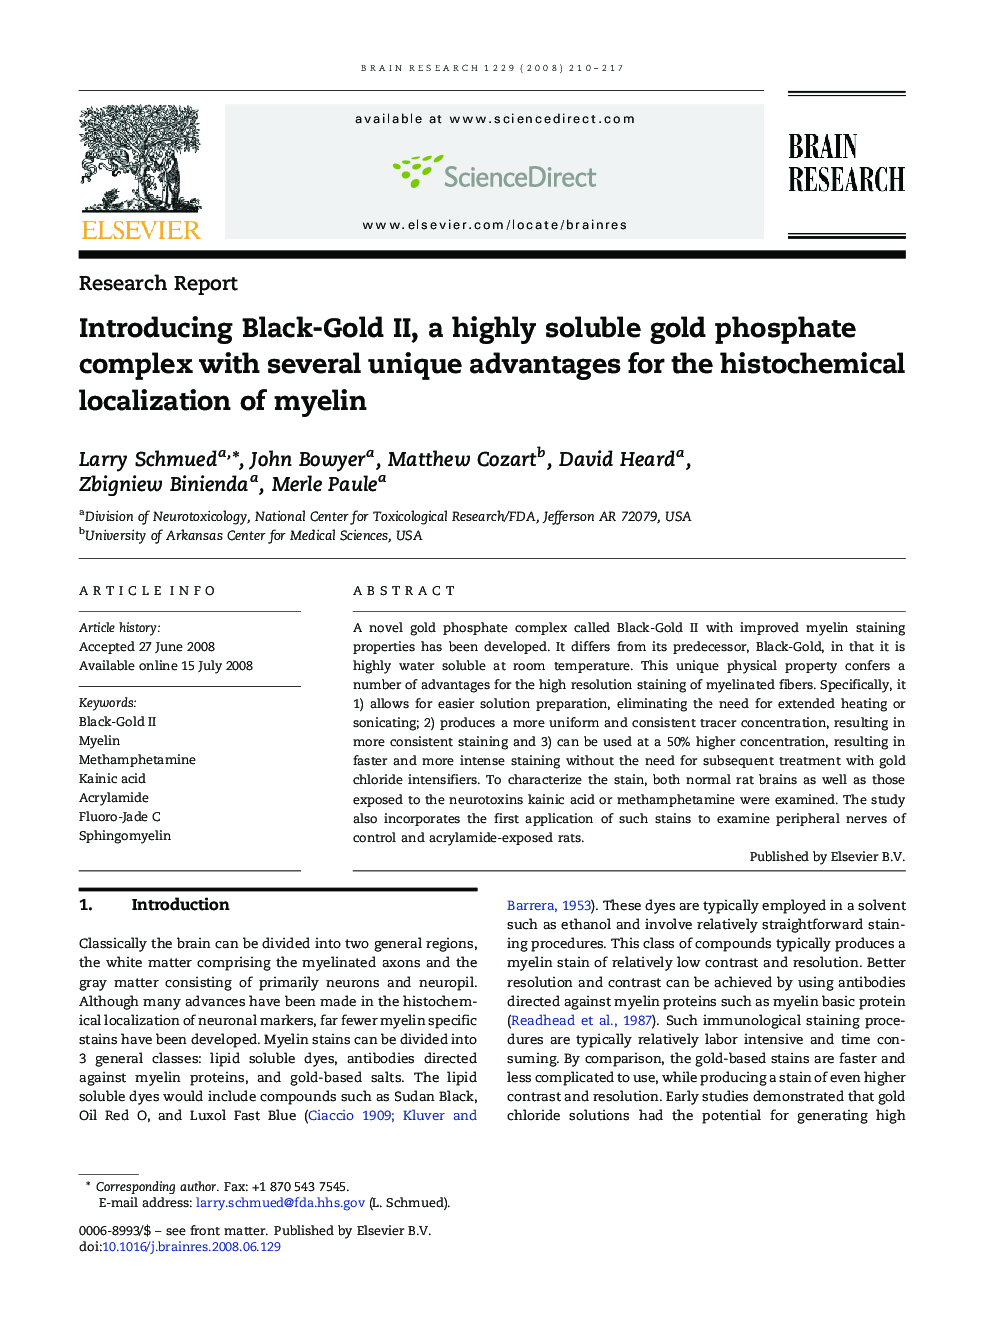 Introducing Black-Gold II, a highly soluble gold phosphate complex with several unique advantages for the histochemical localization of myelin